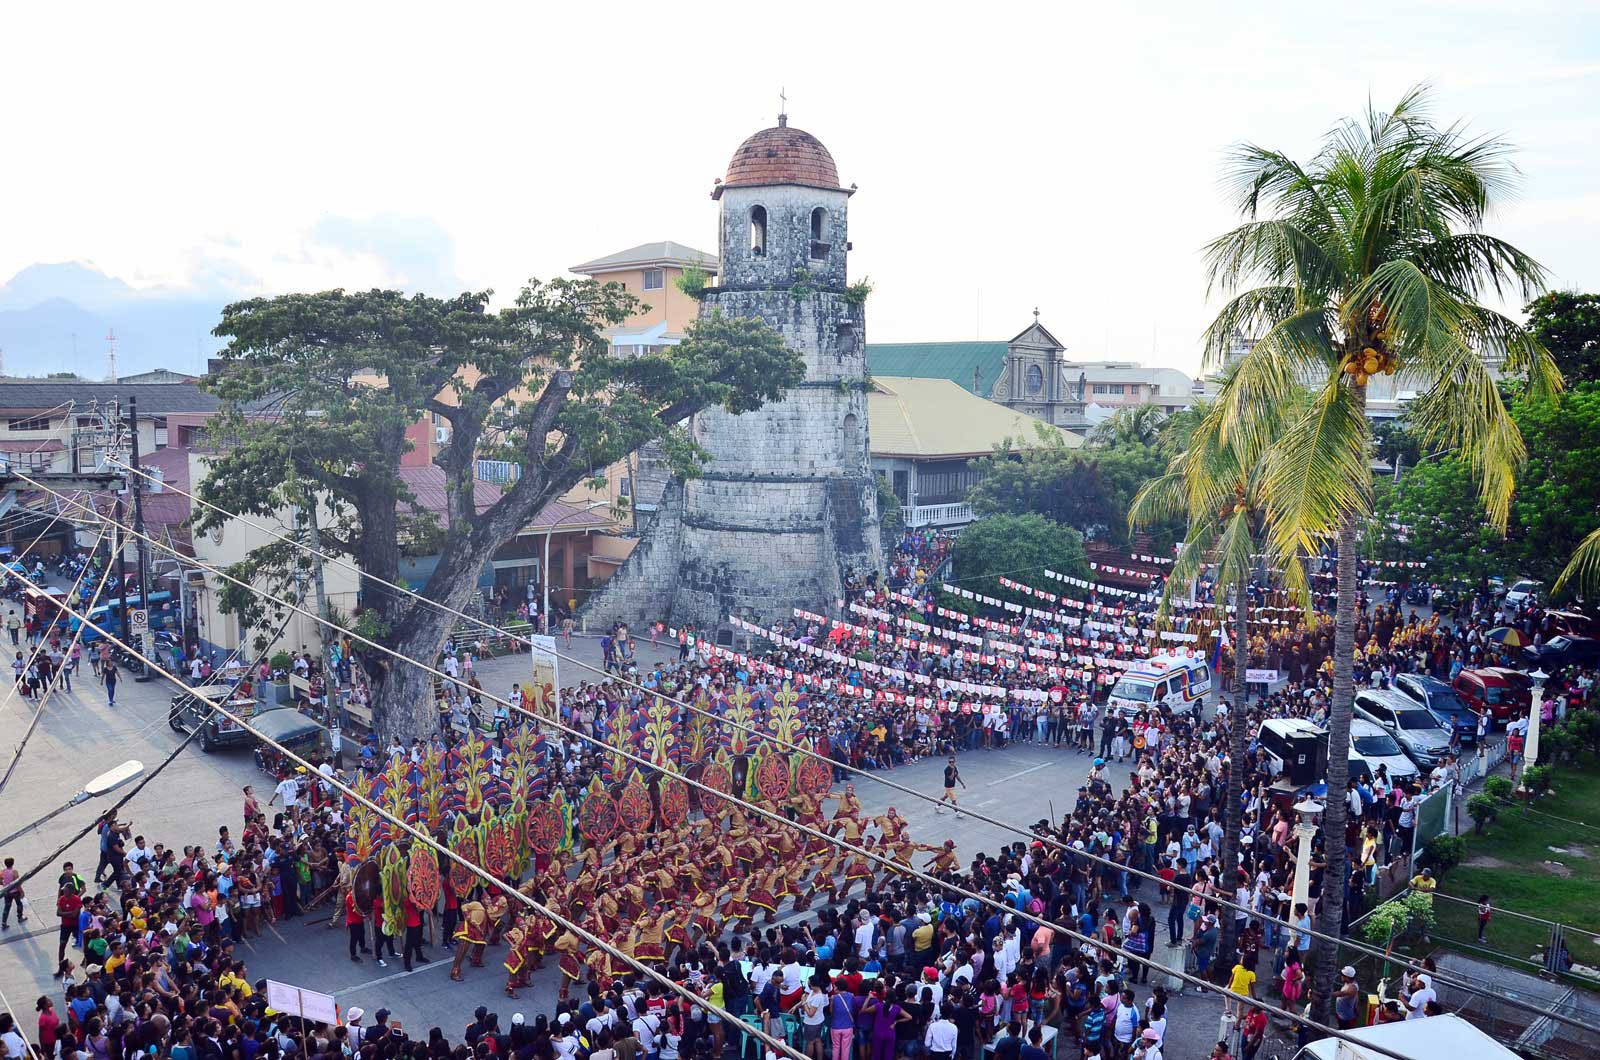 FIESTA. A sea of people crowd the streets of Dumaguete. Photo by Potpot Pinili 